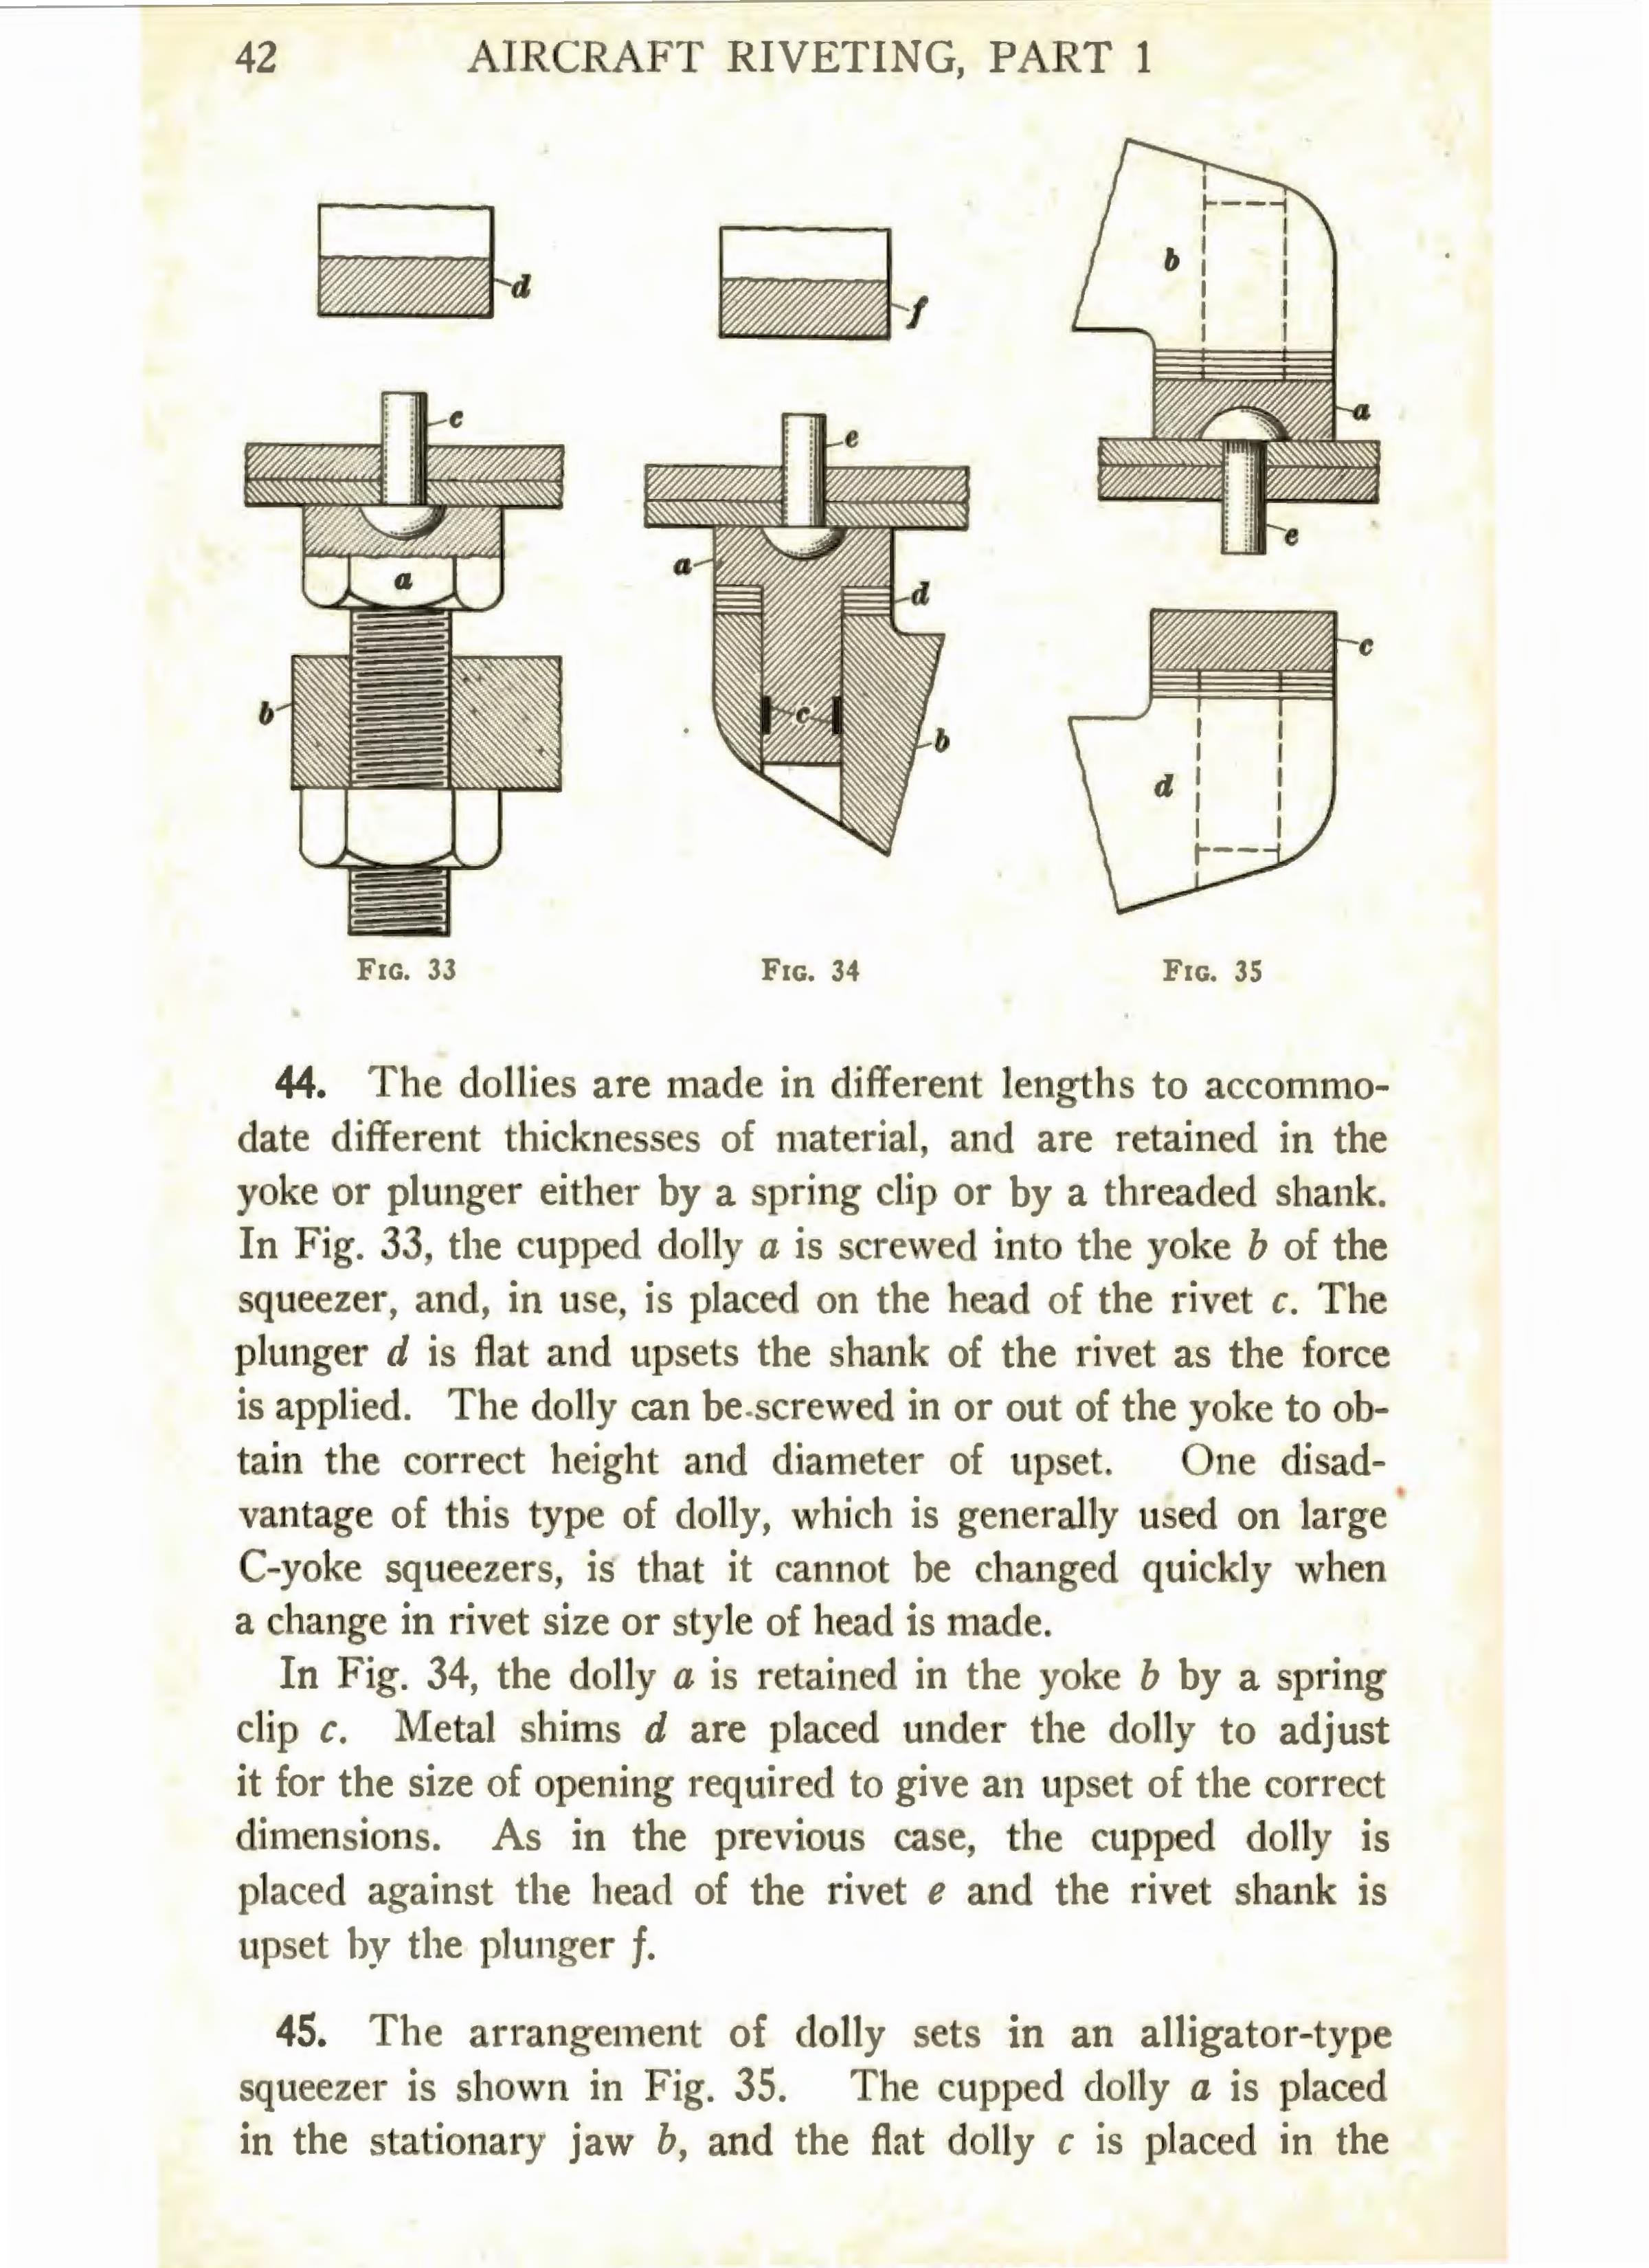 Sample page 44 from AirCorps Library document: Aircraft Riveting Part 1 - Bureau of Aeronautics